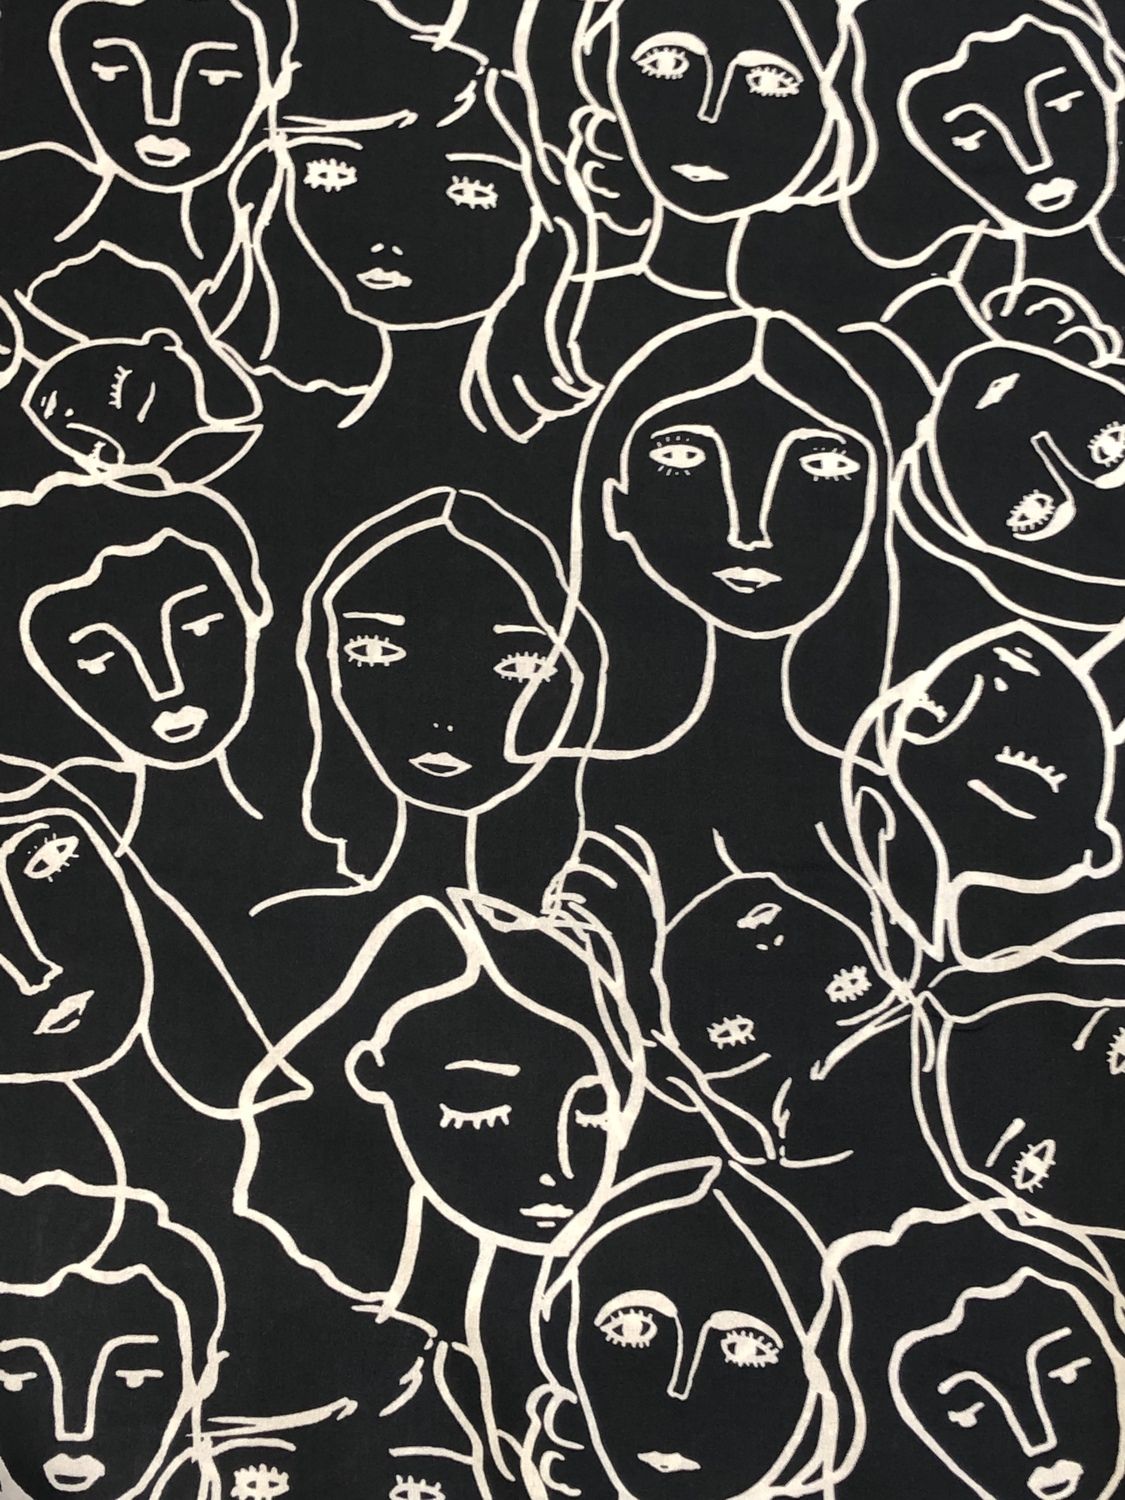 Lady McElroy Crowded Faces Cotton Lawn Black. Abstract face art, Abstract faces, Art